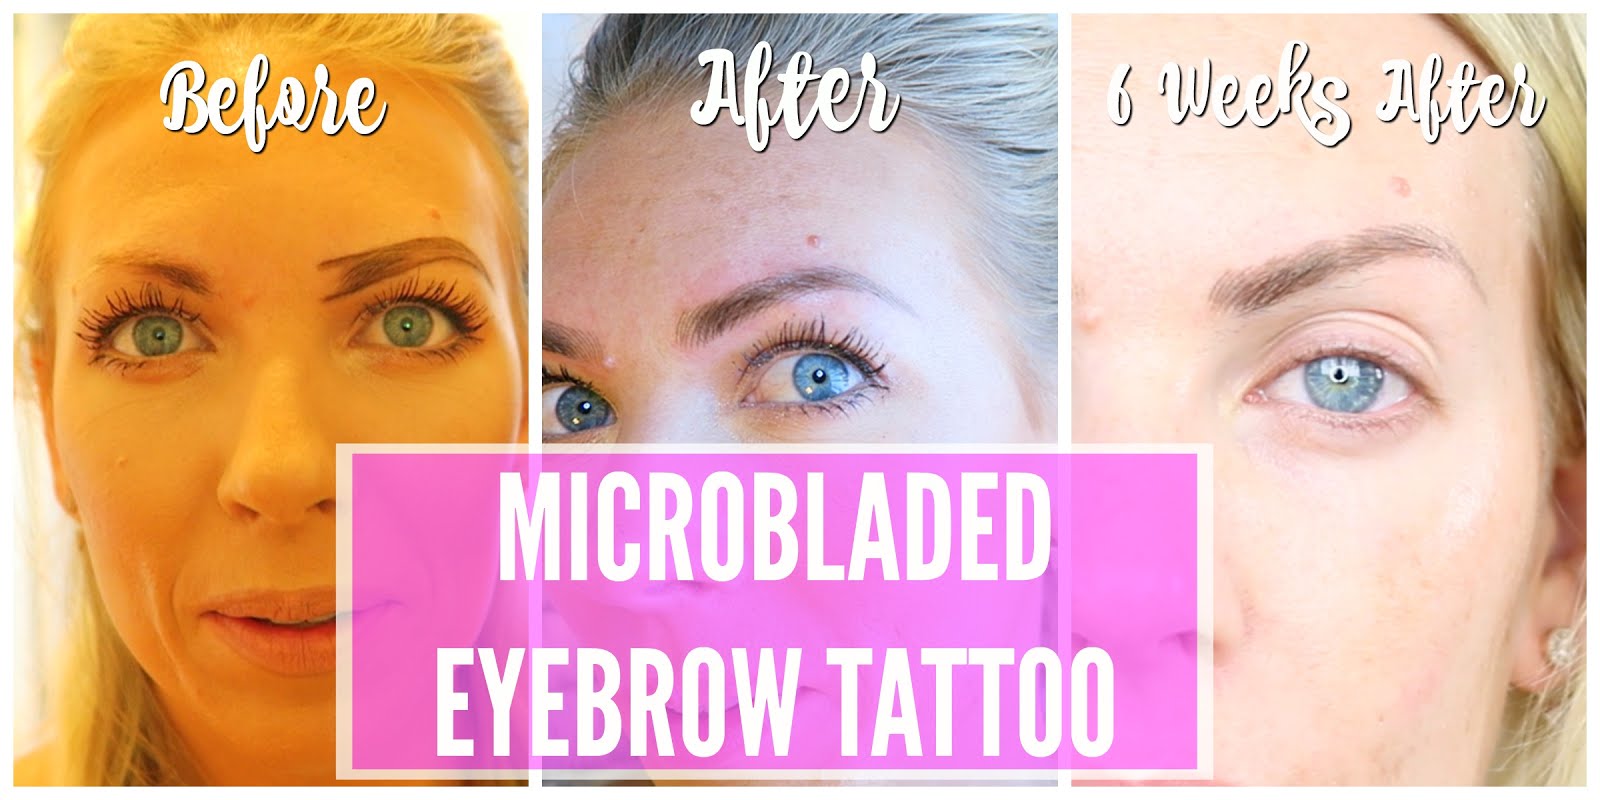 Microblading the first week day by day photos of microblading healing  Microblading for oily skin  Microblading eyebrows Microblading Eye  makeup tutorial